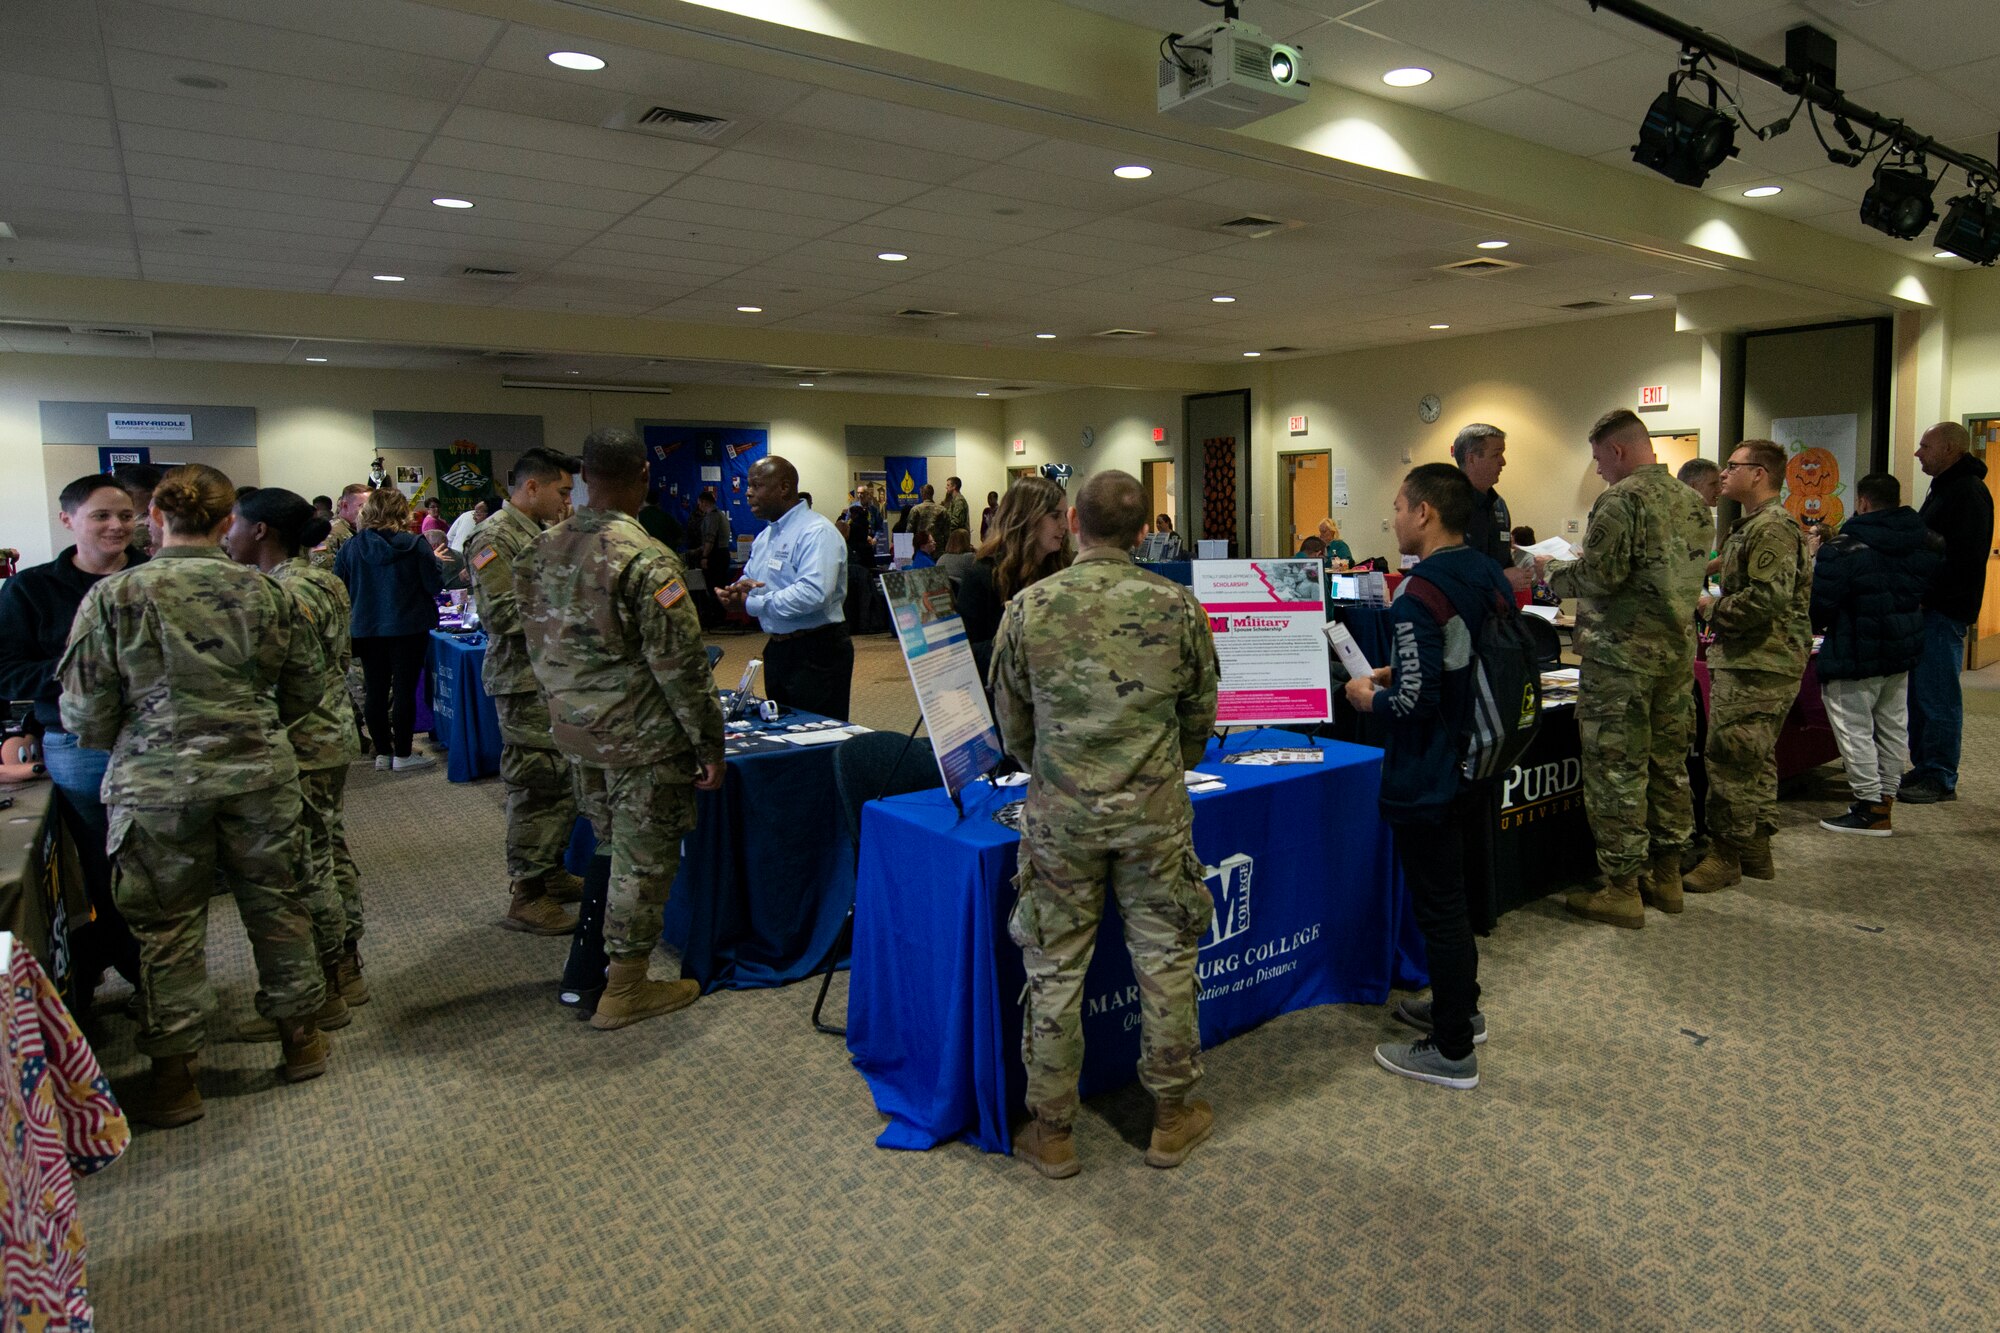 U.S. Soldiers assigned to U.S. Army Alaska attend the Fall Education Fair at Joint Base Elmendorf-Richardson, Alaska, Oct. 31, 2019. The JBER Army Education Center held the event, which allowed more than 20 vendors to showcase different educational opportunities.